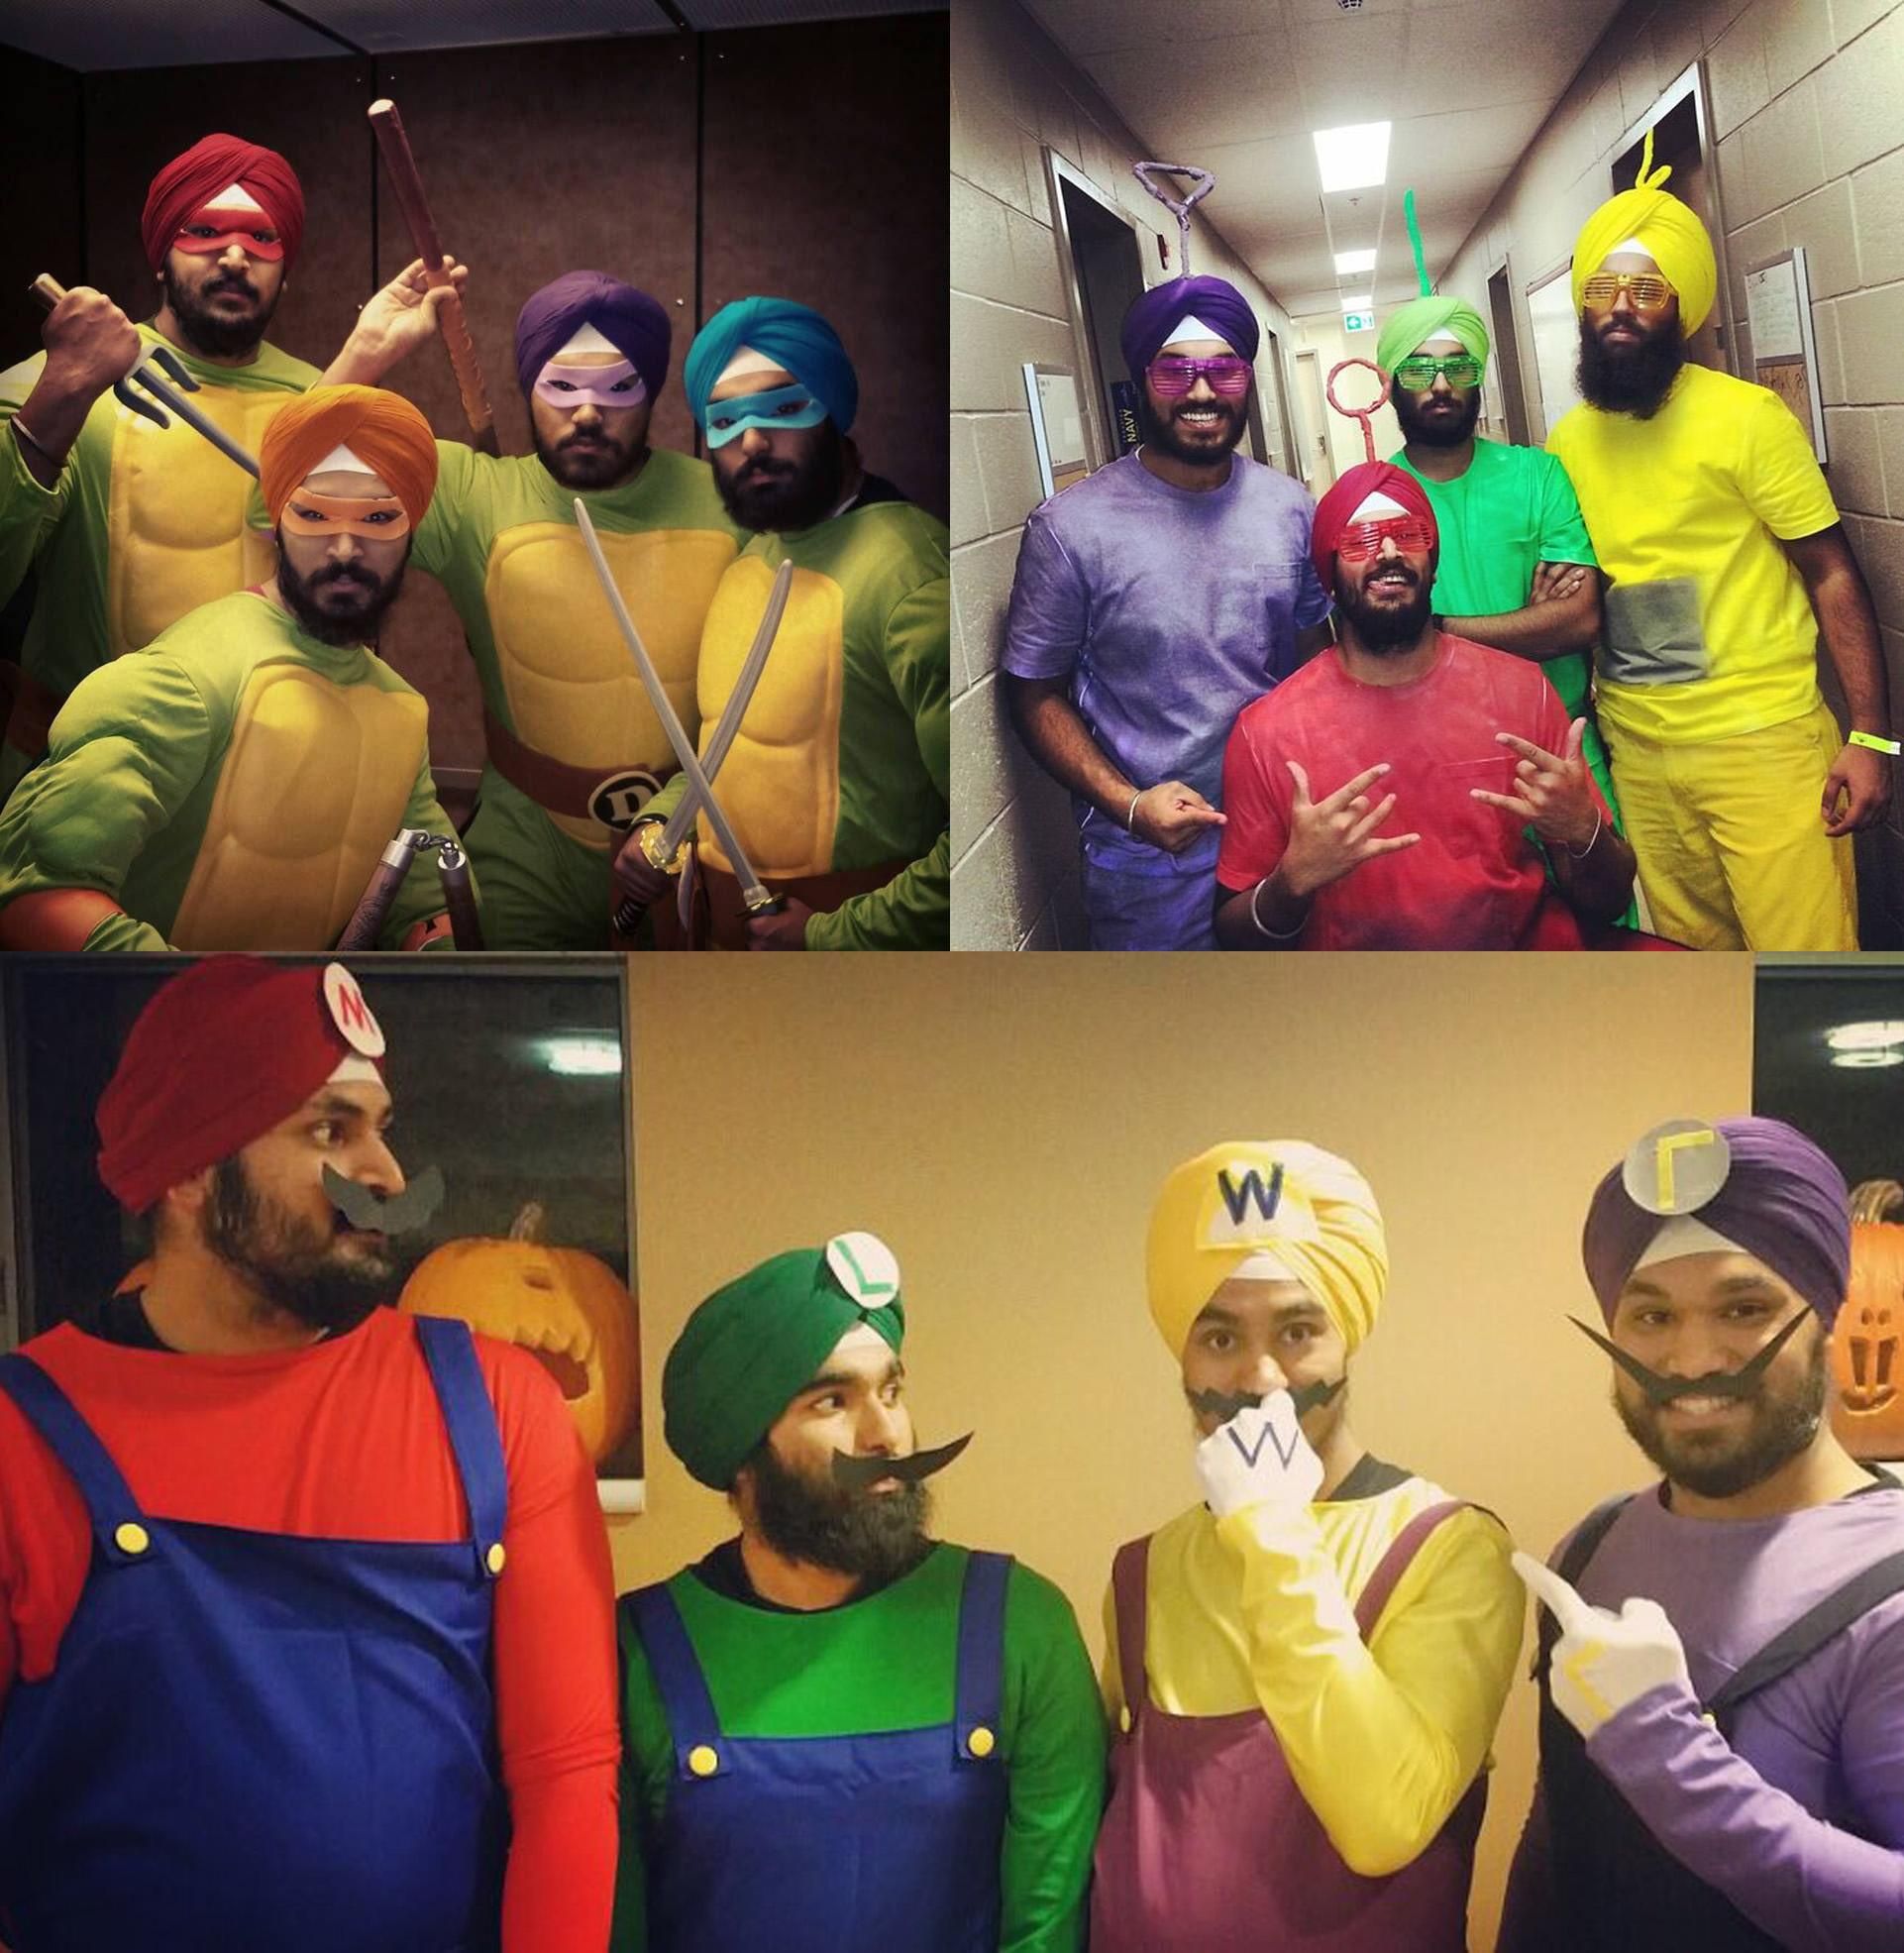 Some Sikh Halloween costumes